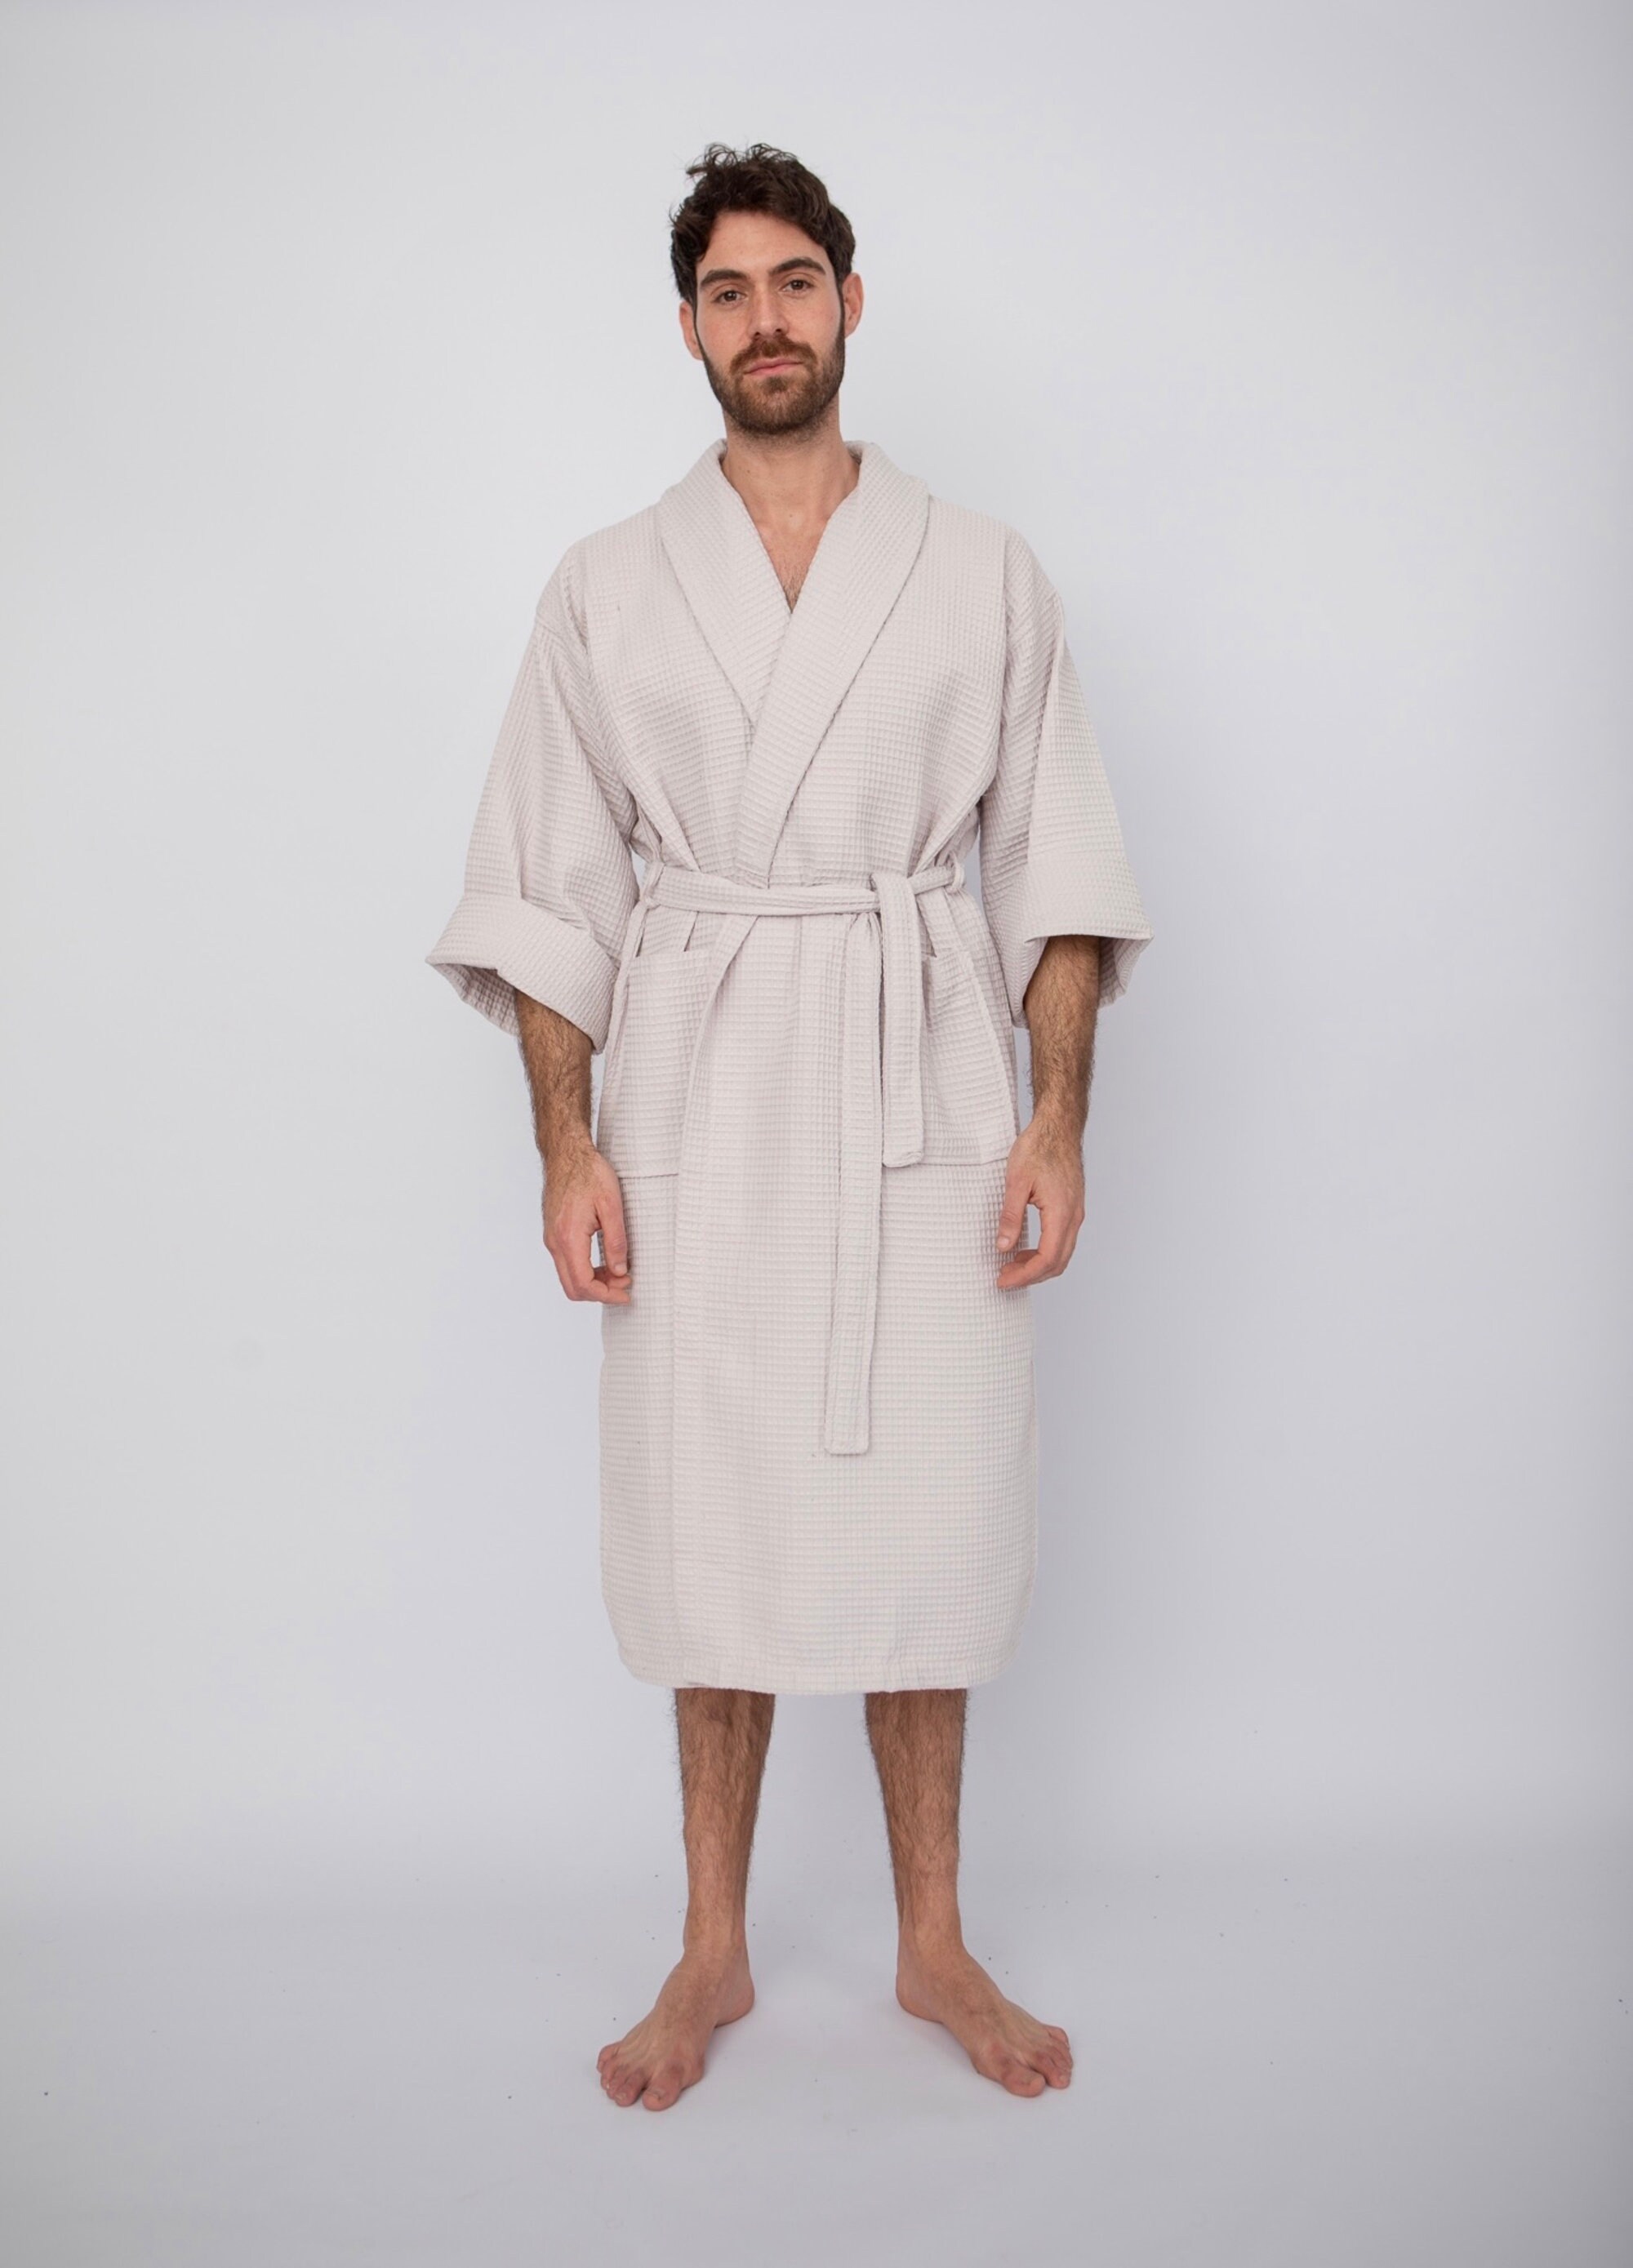 Clothing Gender-Neutral Adult Clothing Pyjamas & Robes Dressing gowns Green House Babylon Unisex Bathrobe Waffle Dressing Gown 230 GSM Pure Turkish Cotton Oeko-Tex Certified Bath Robes For Men And Women 